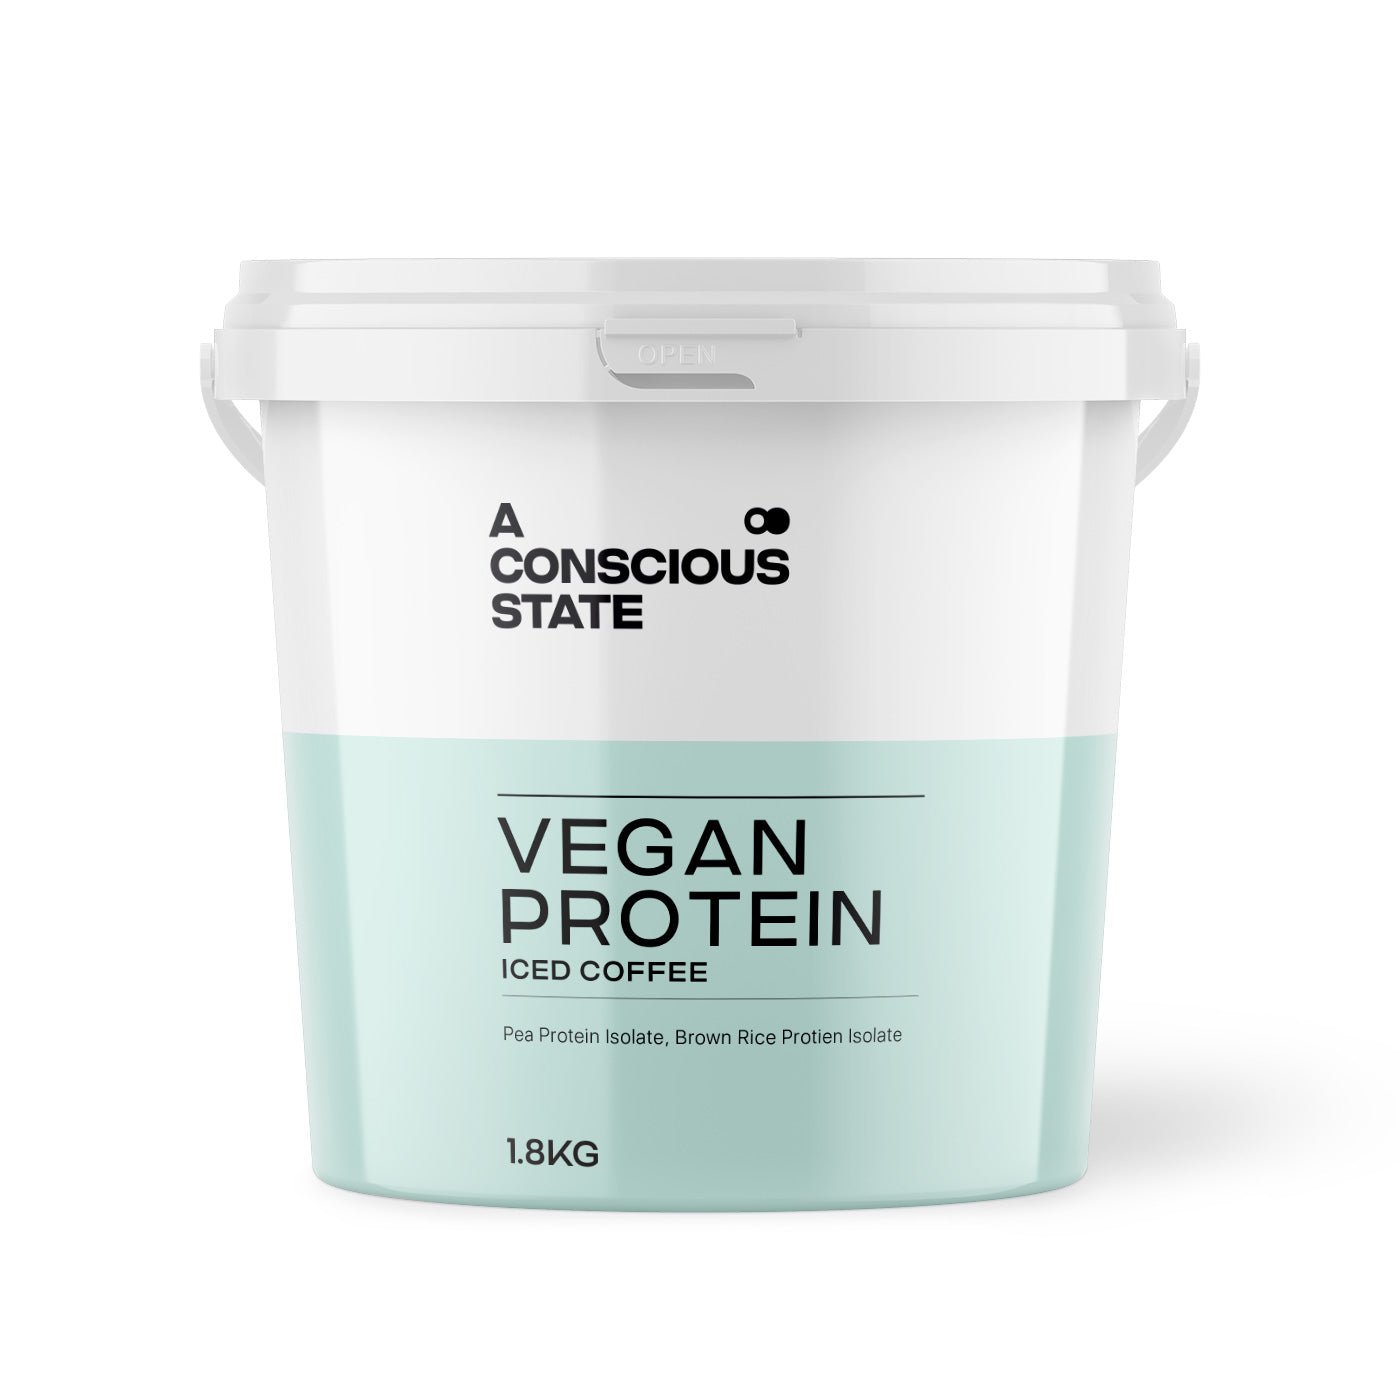 Vegan Iced Coffee Protein 1.8kg - A Conscious State